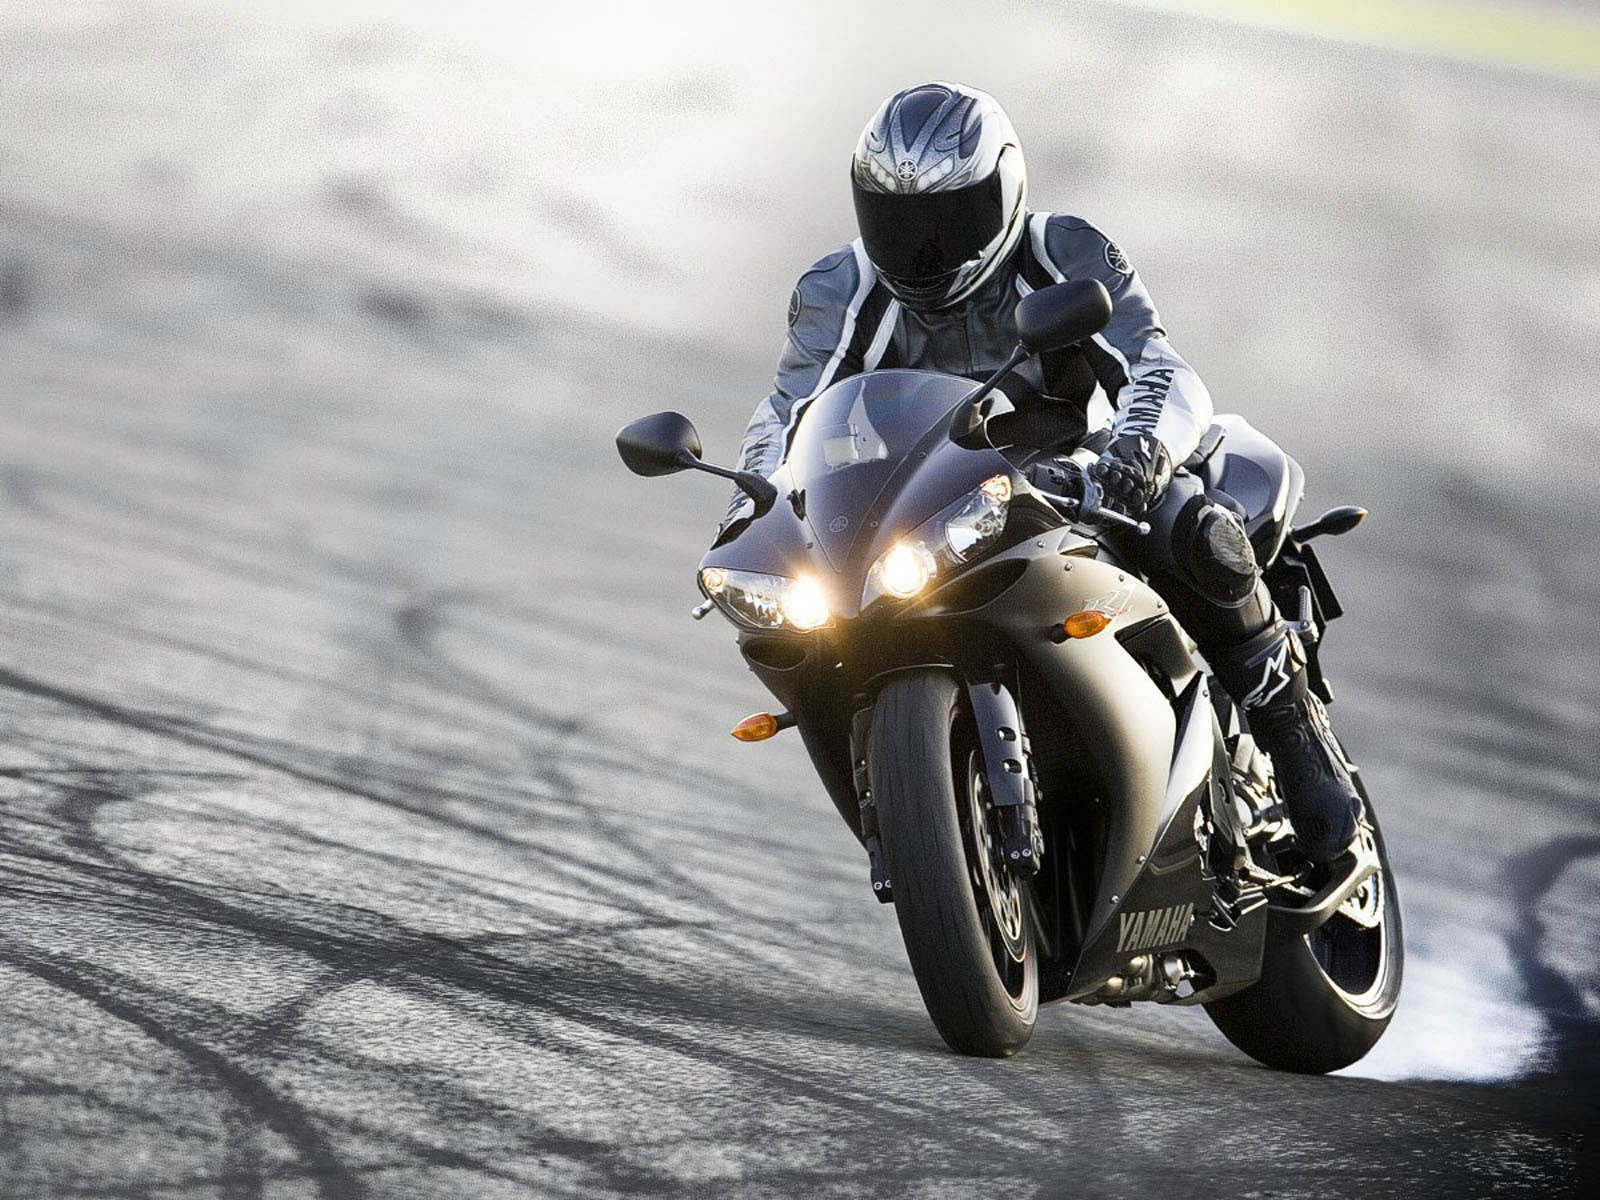 Top 5 Motorcycle Brands in the Philippines